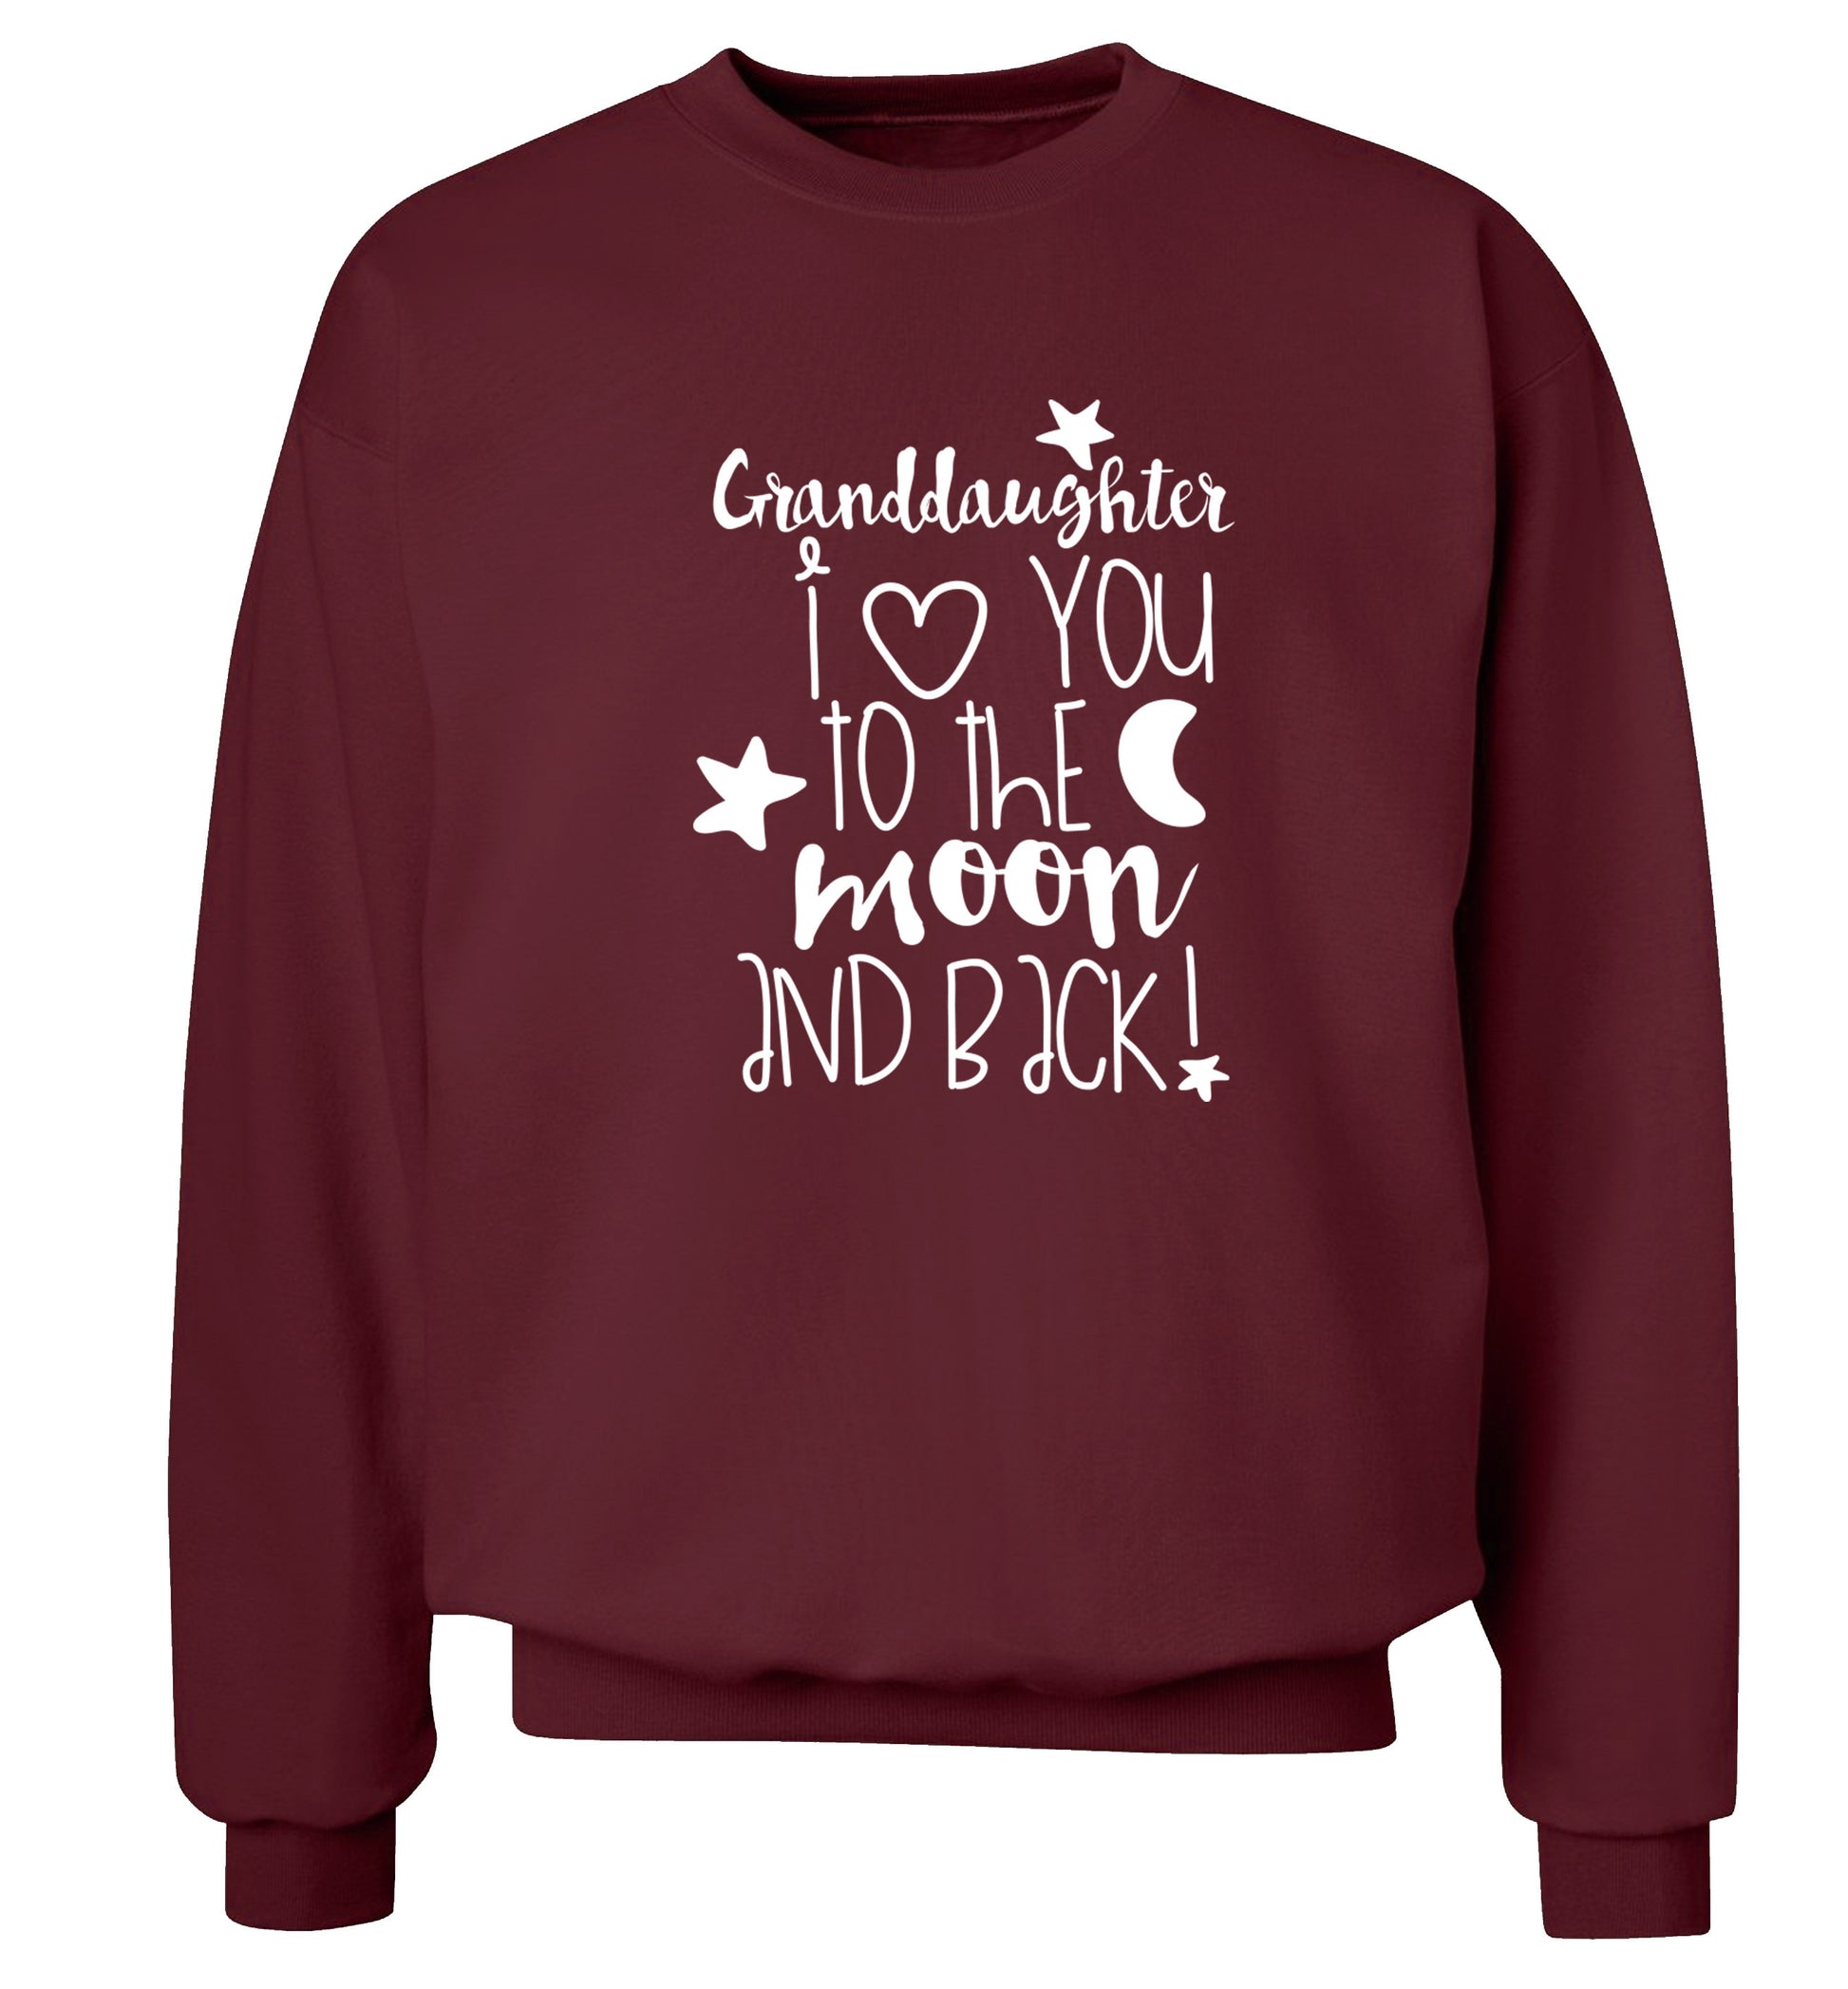 Granddaughter I love you to the moon and back Adult's unisex maroon  sweater 2XL